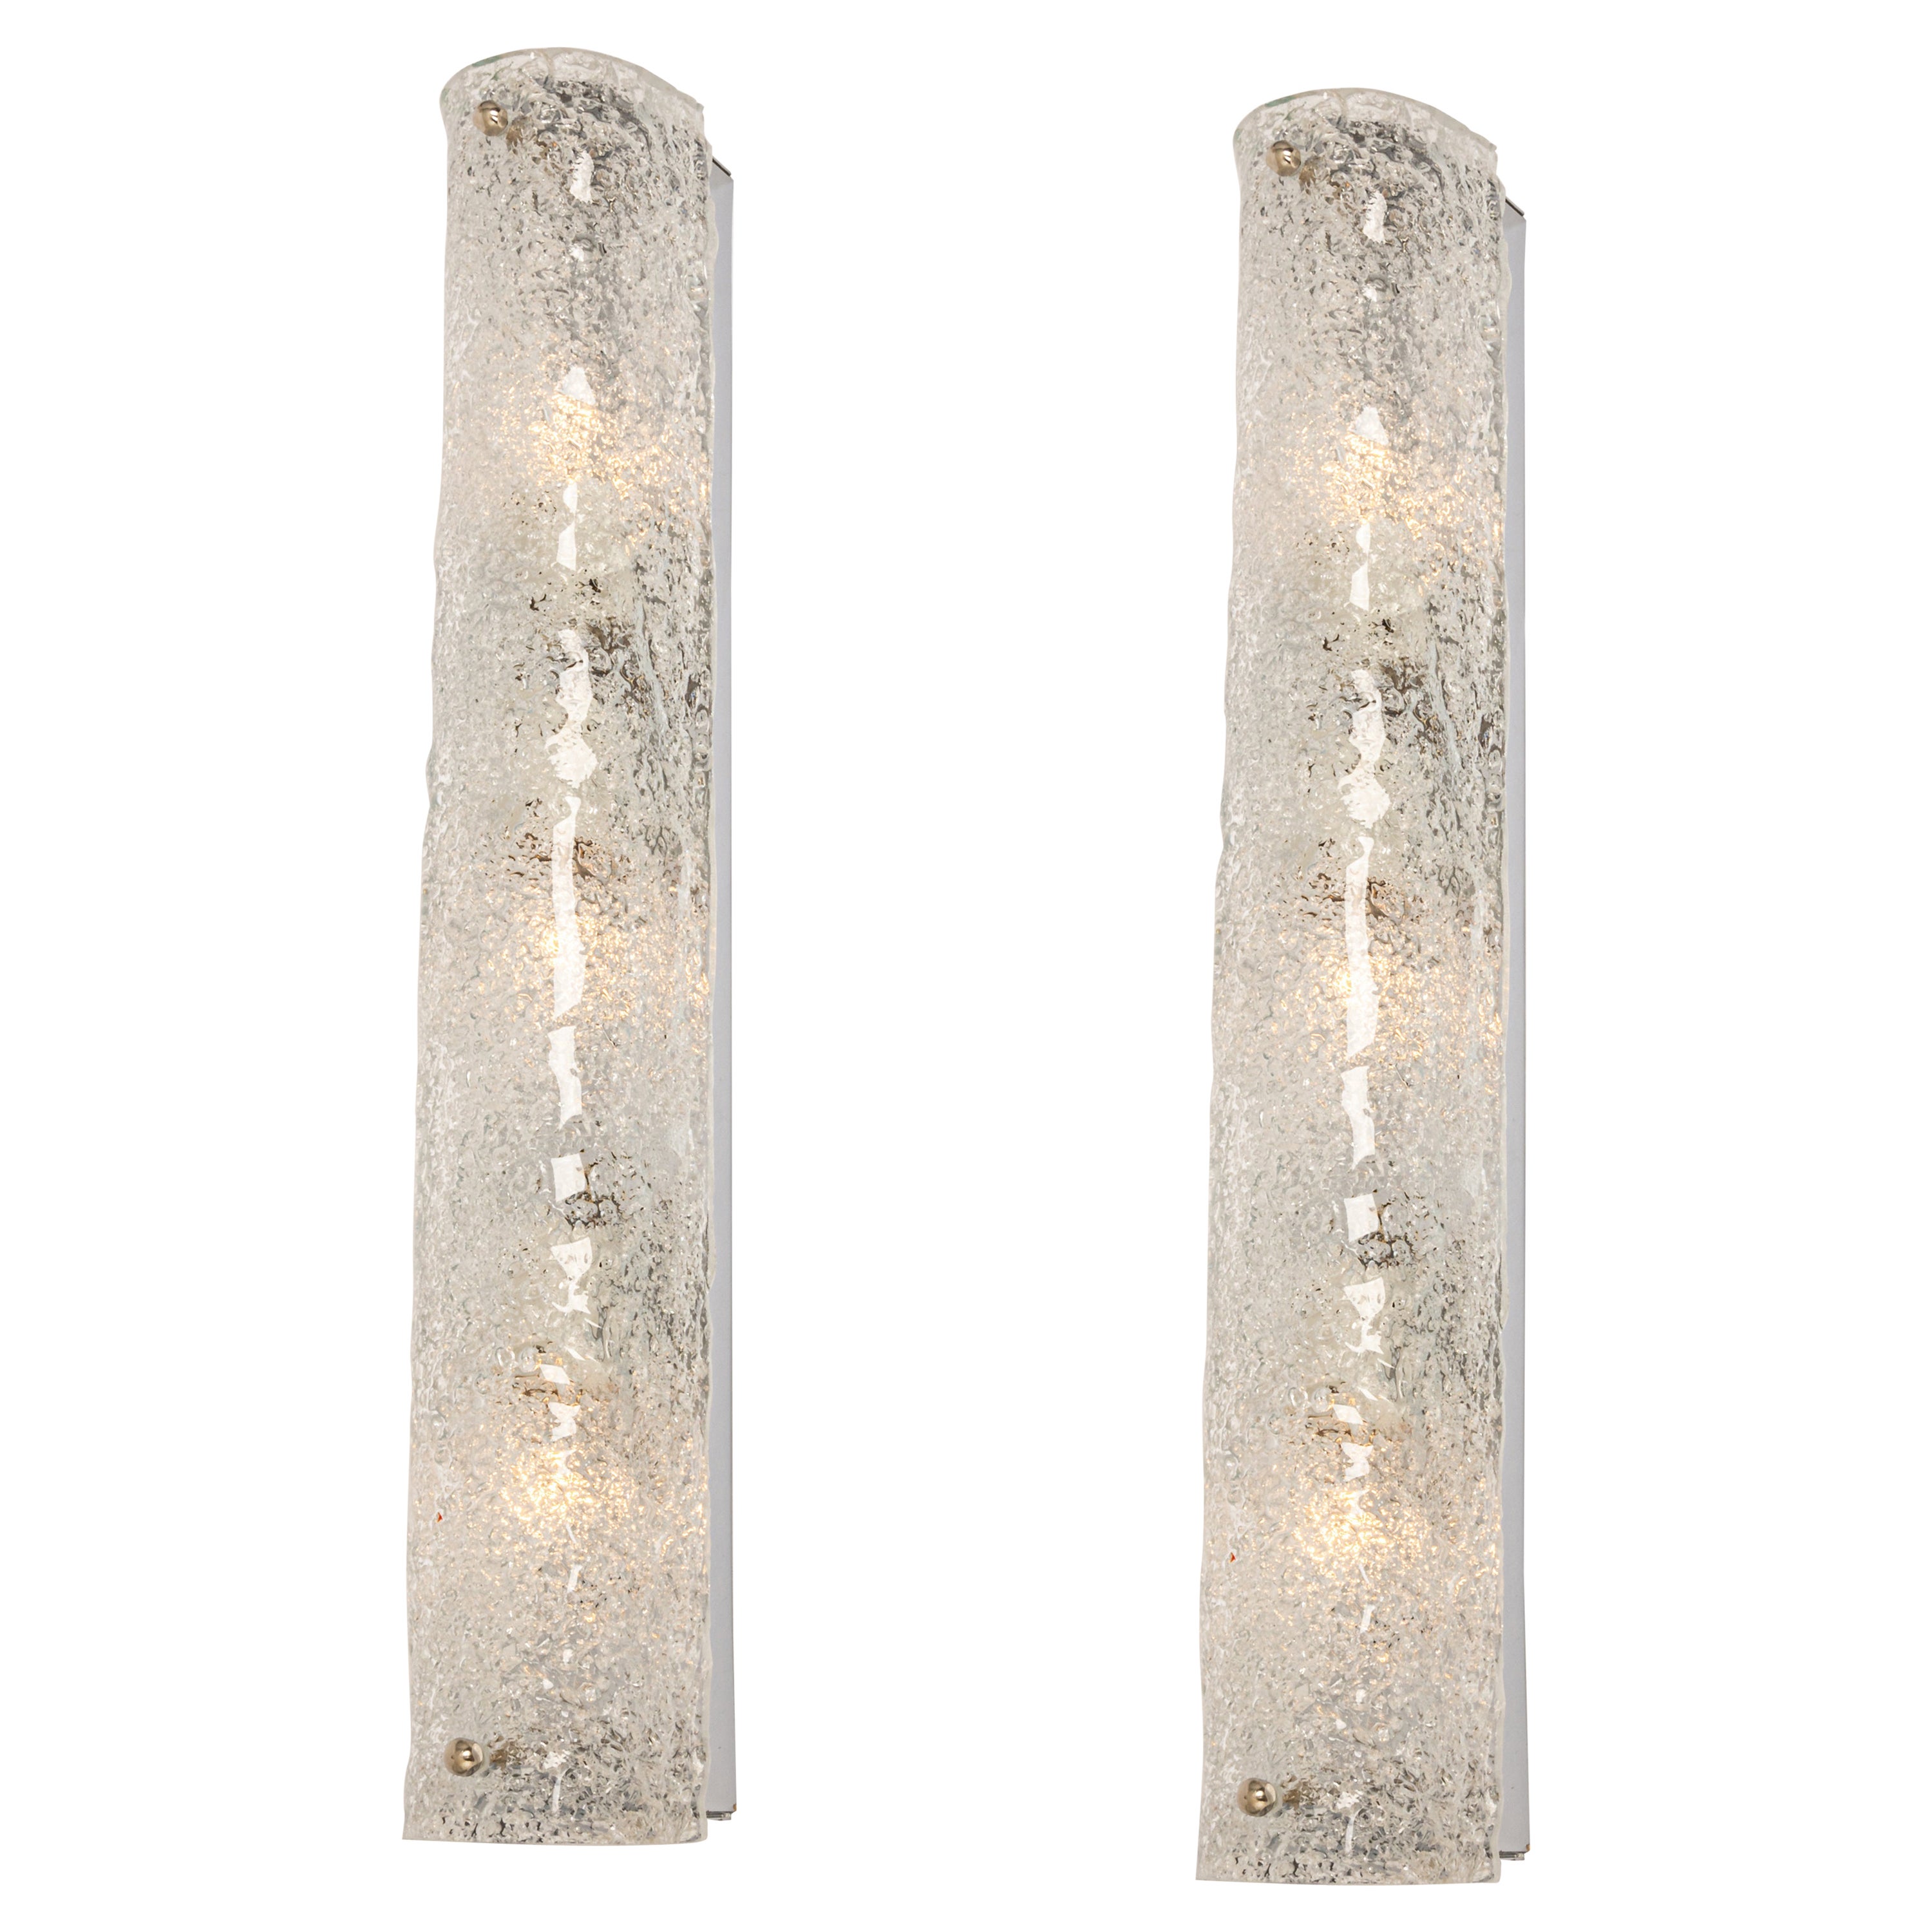 Pair of Large Murano Ice Glass Sconces Modernist Wall Fixtures, Germany, 1960s